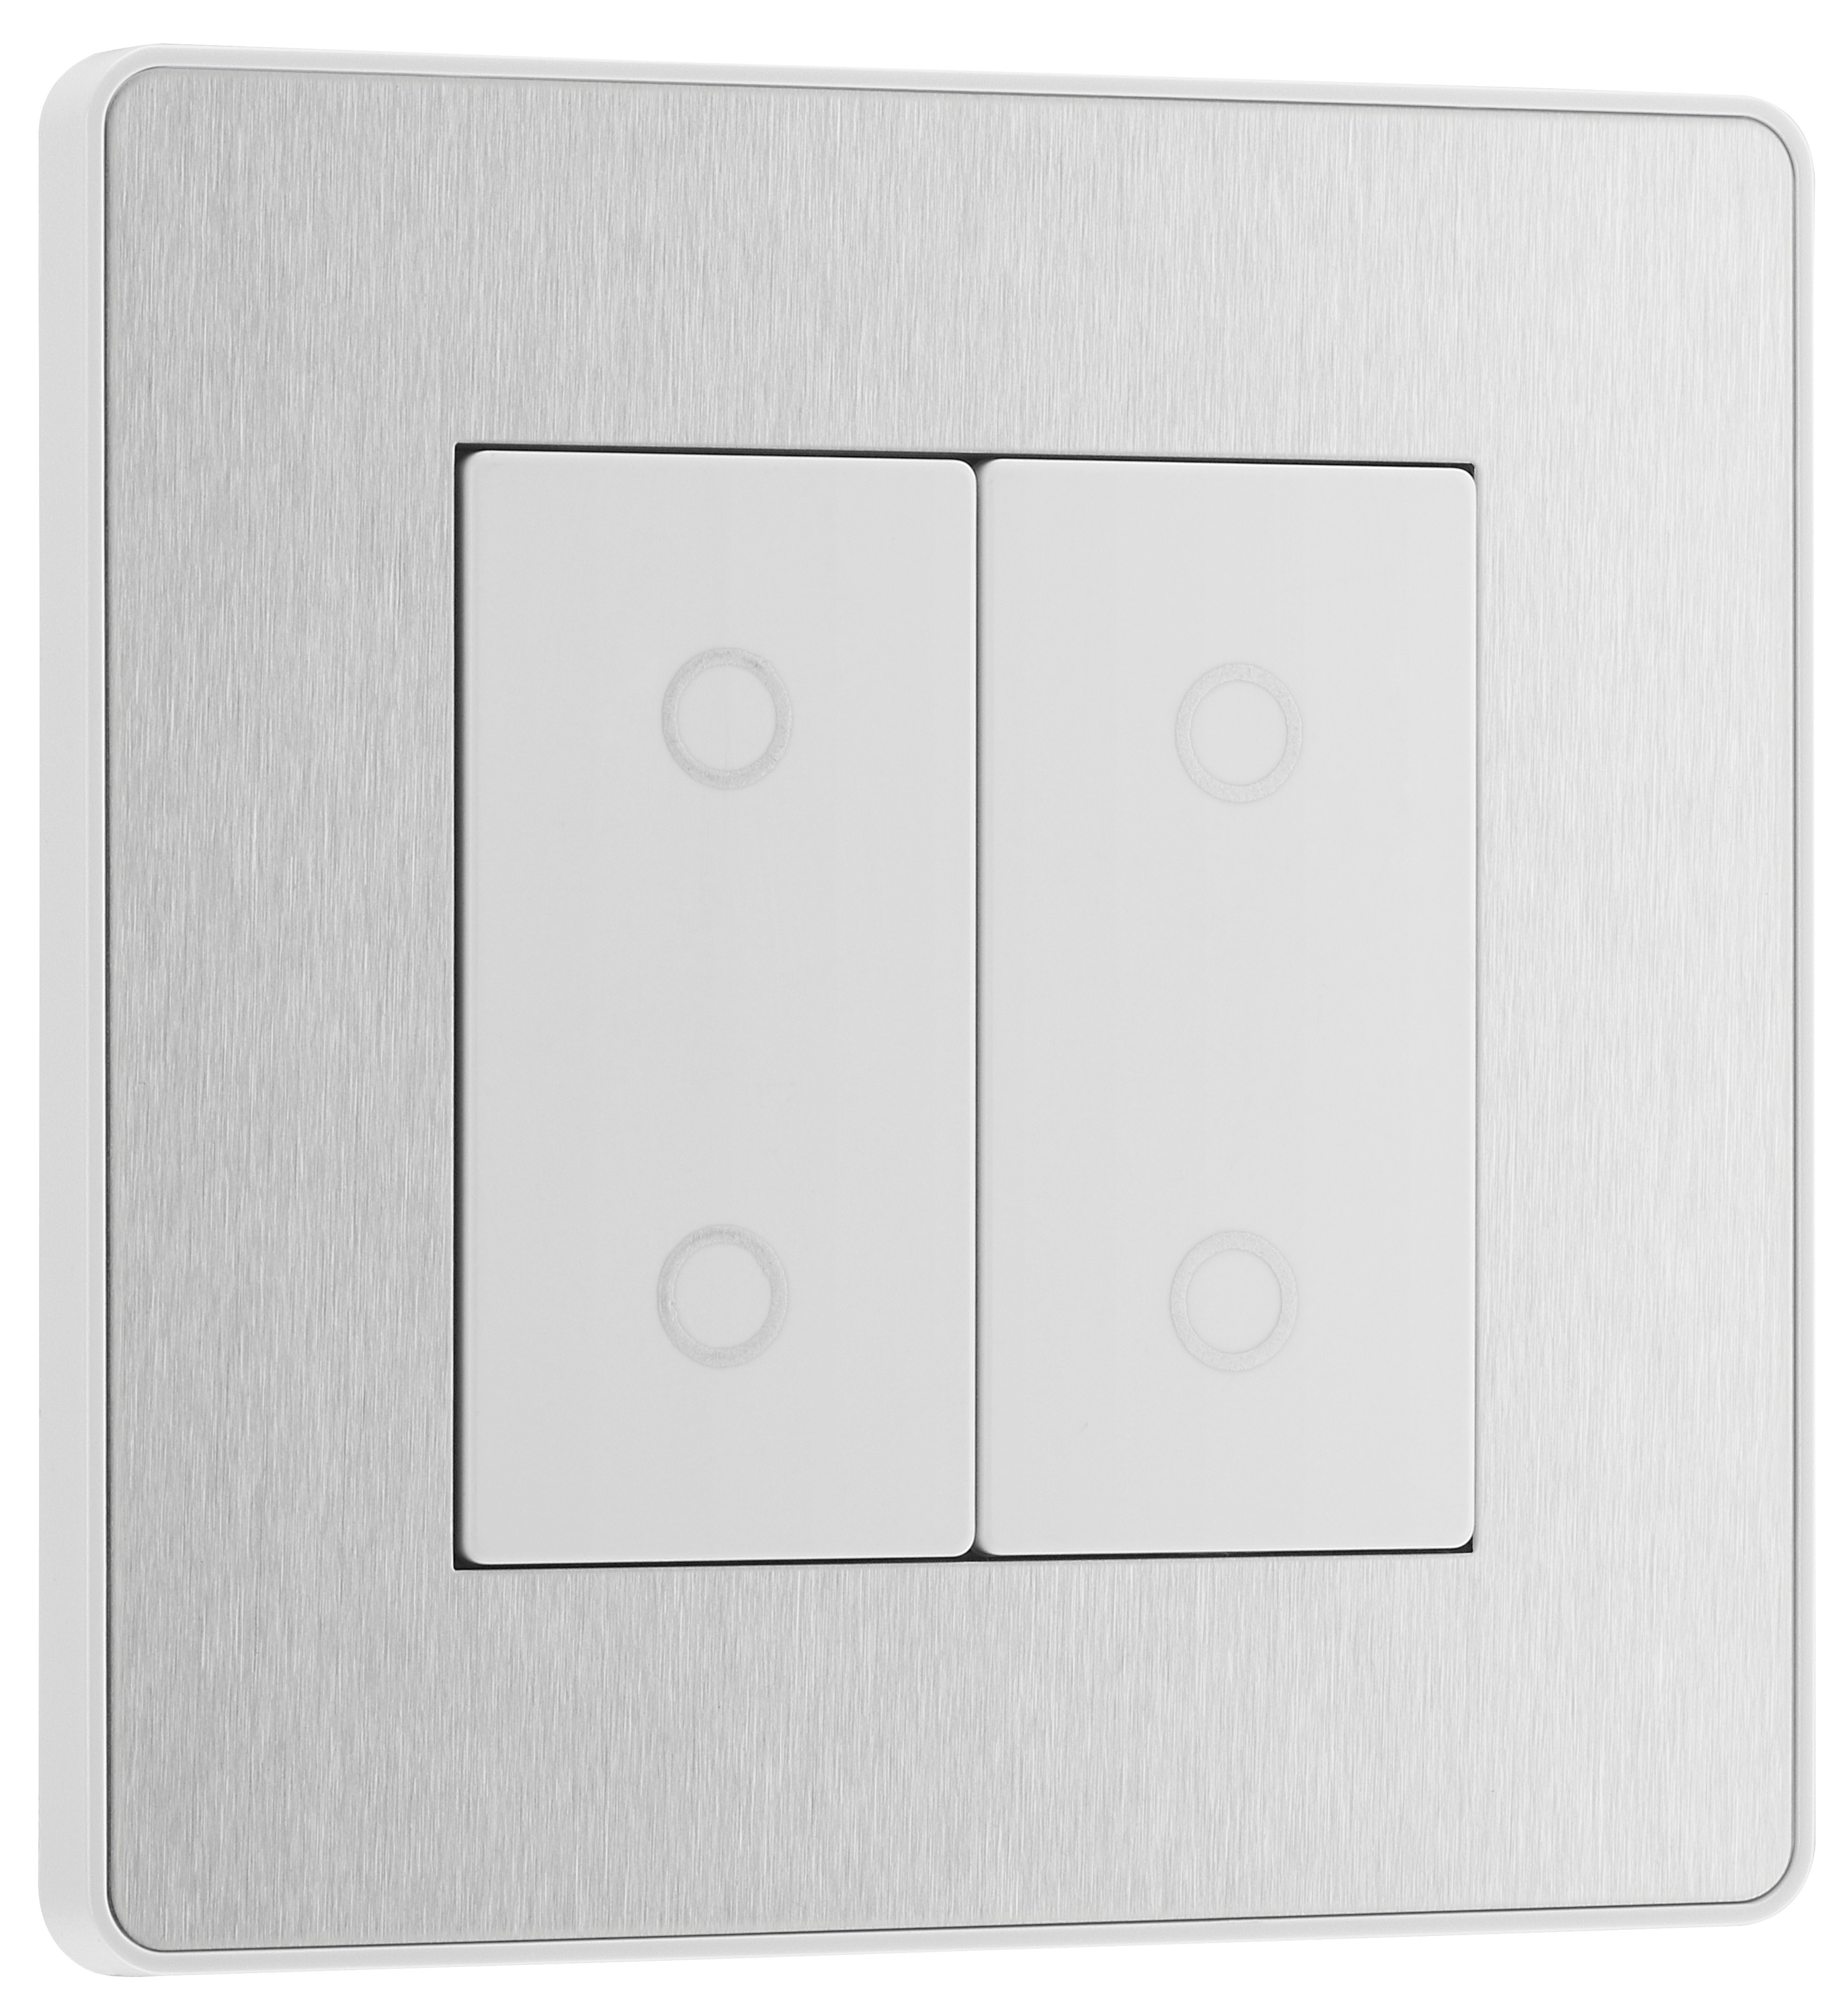 BG Evolve Brushed Steel 2 Way Secondary Double Touch Dimmer Switch - 200W